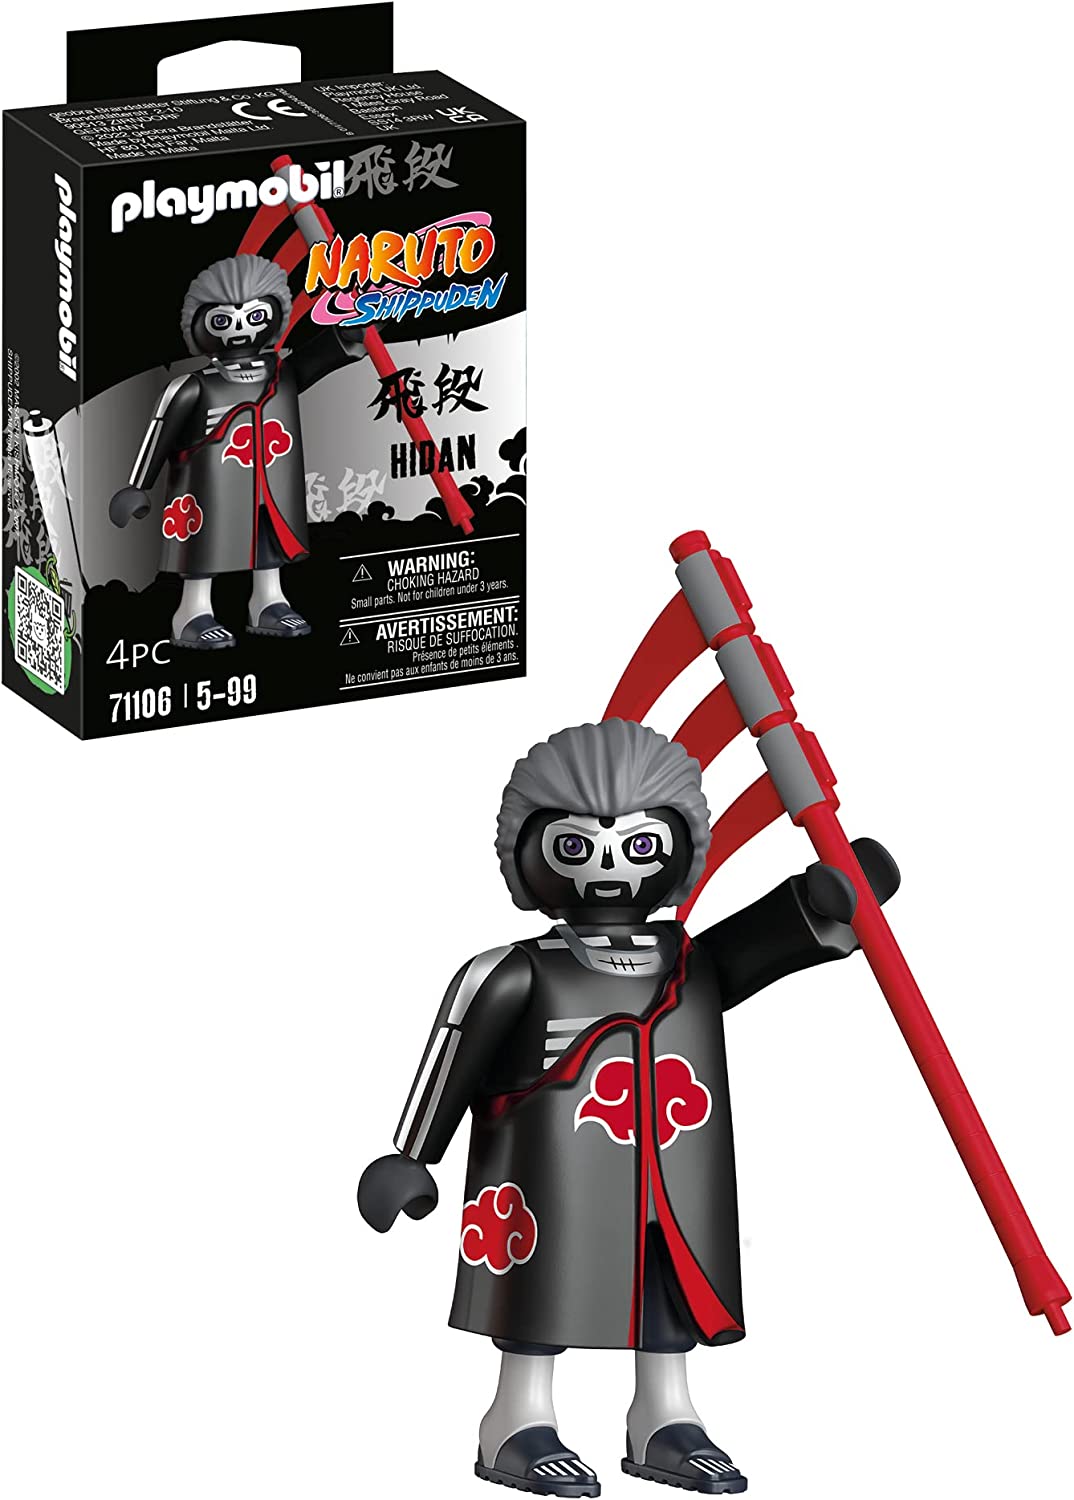 Playmobil Naruto Shippuden 71106 Hidan with Black Akatsuki Coat and Scythe, Creative Fun for Anime Fans With Great Details and Authentic Extras, 4 Pieces, From 5 Years